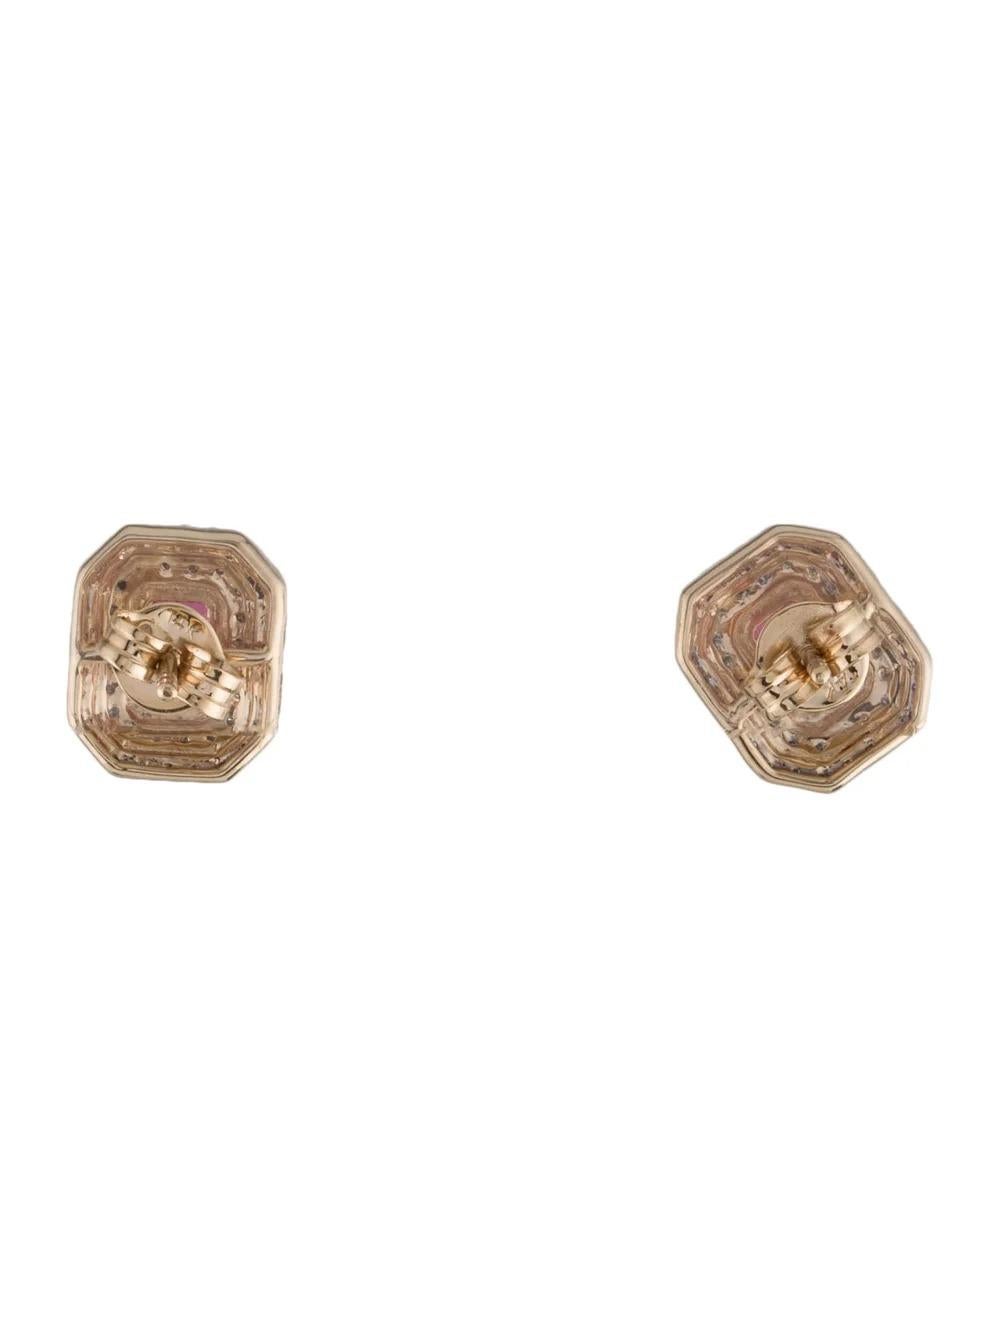 14K Tourmaline Diamond Stud Earrings - Fine Gemstone Statement Jewelry In New Condition For Sale In Holtsville, NY